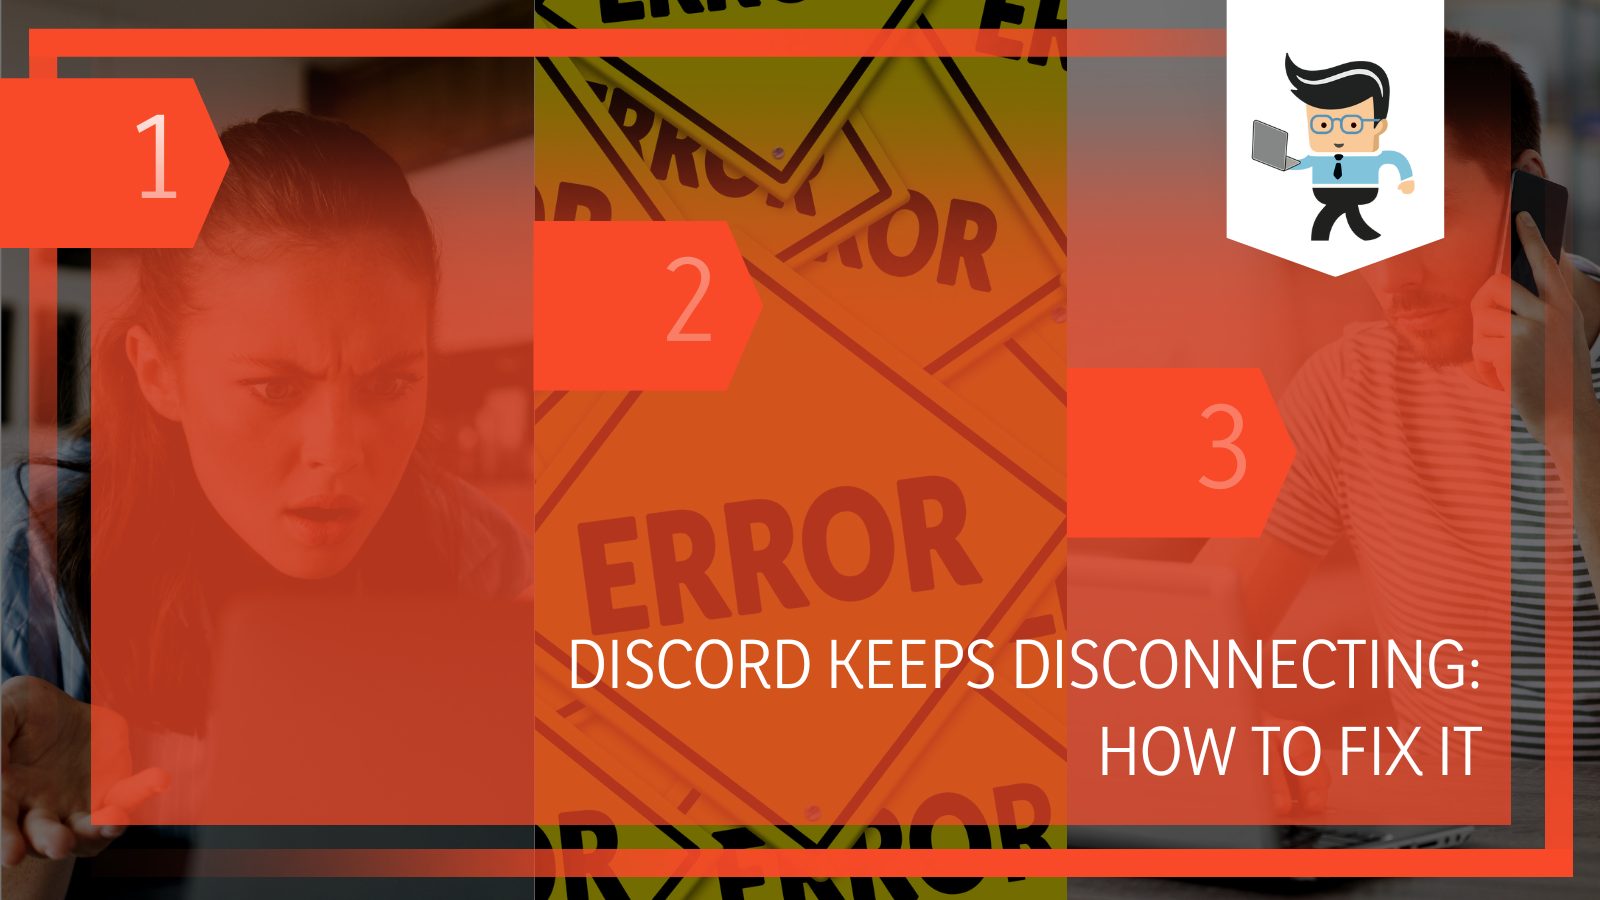 Discord Keeps Disconnecting and Reconnecting